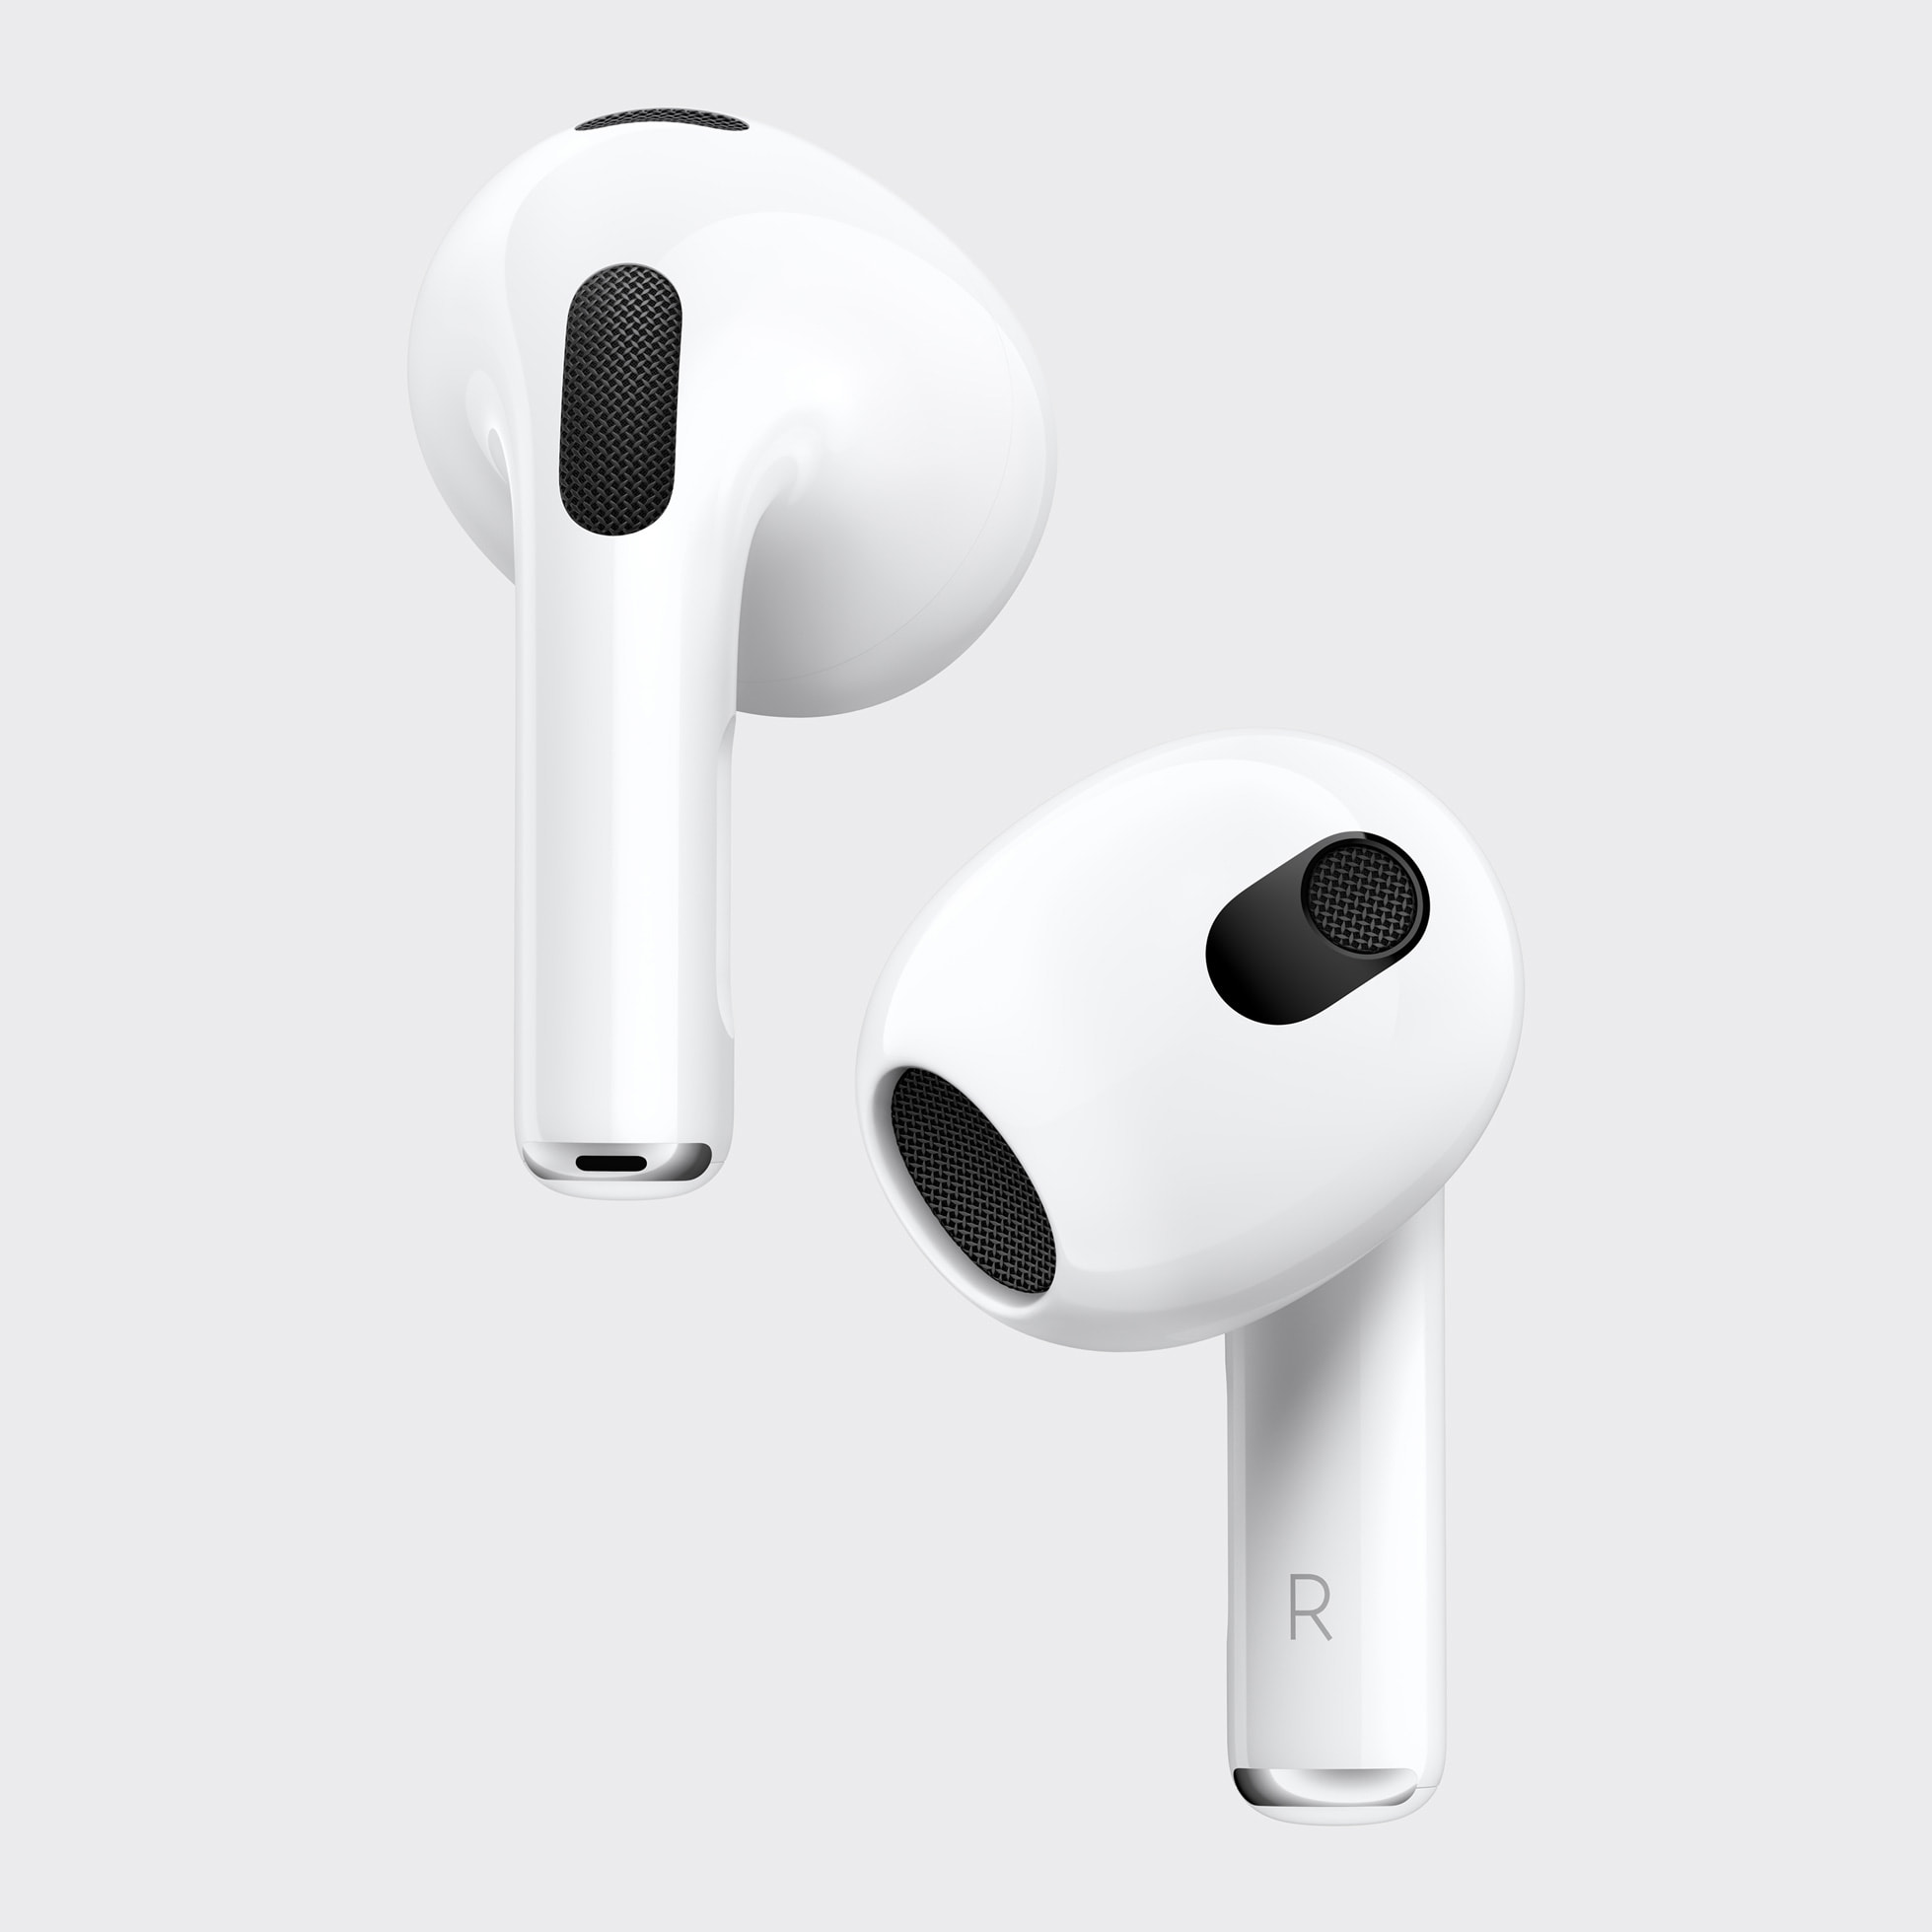 Is Apple About to Revolutionize Your AirPods Experience with a Touch  Display Upgrade?